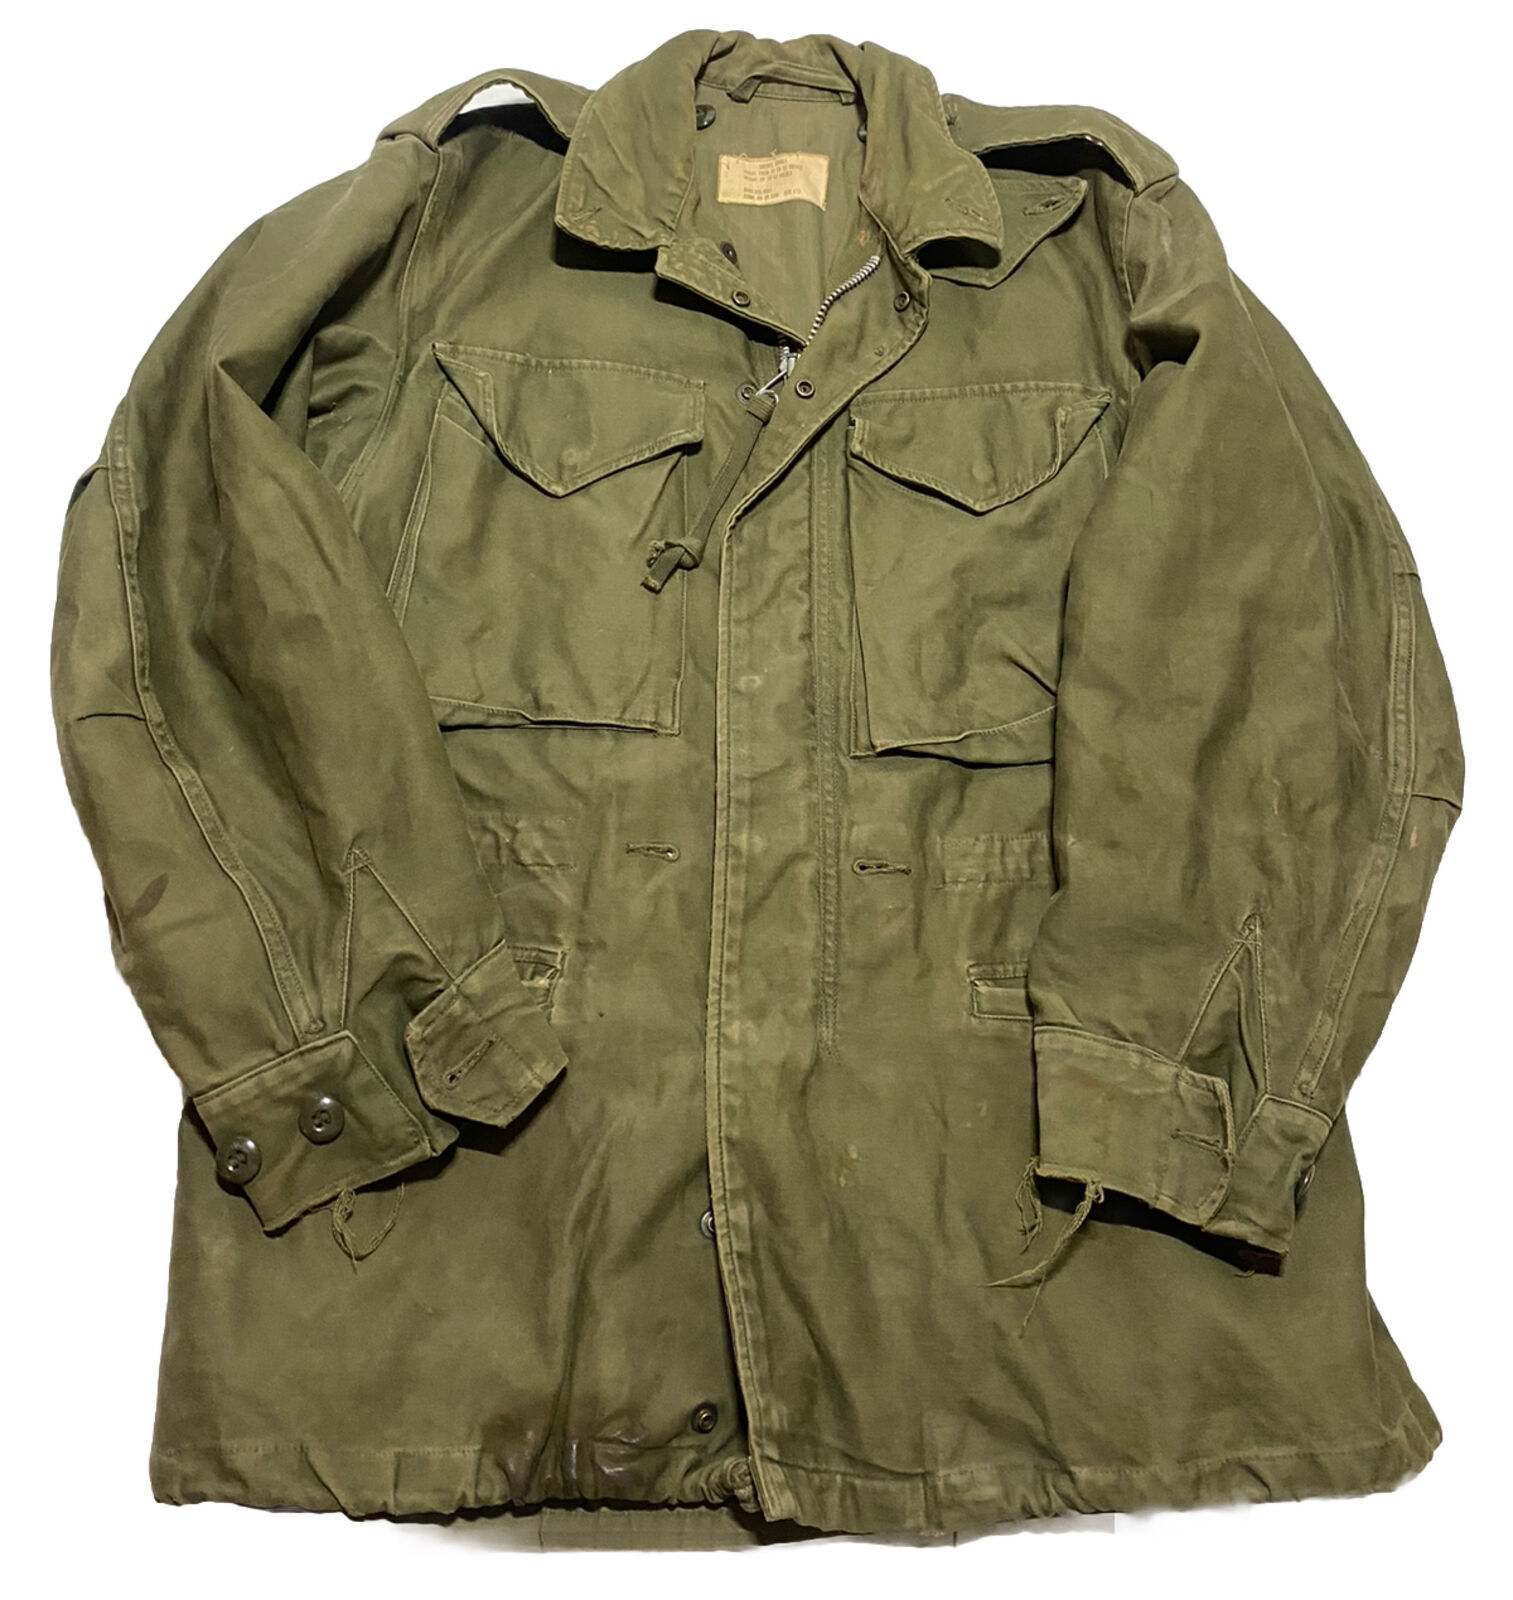 Vintage 50s M-51 Field Jacket Military US Army Coat M-1951 S OG-107 Size S W2